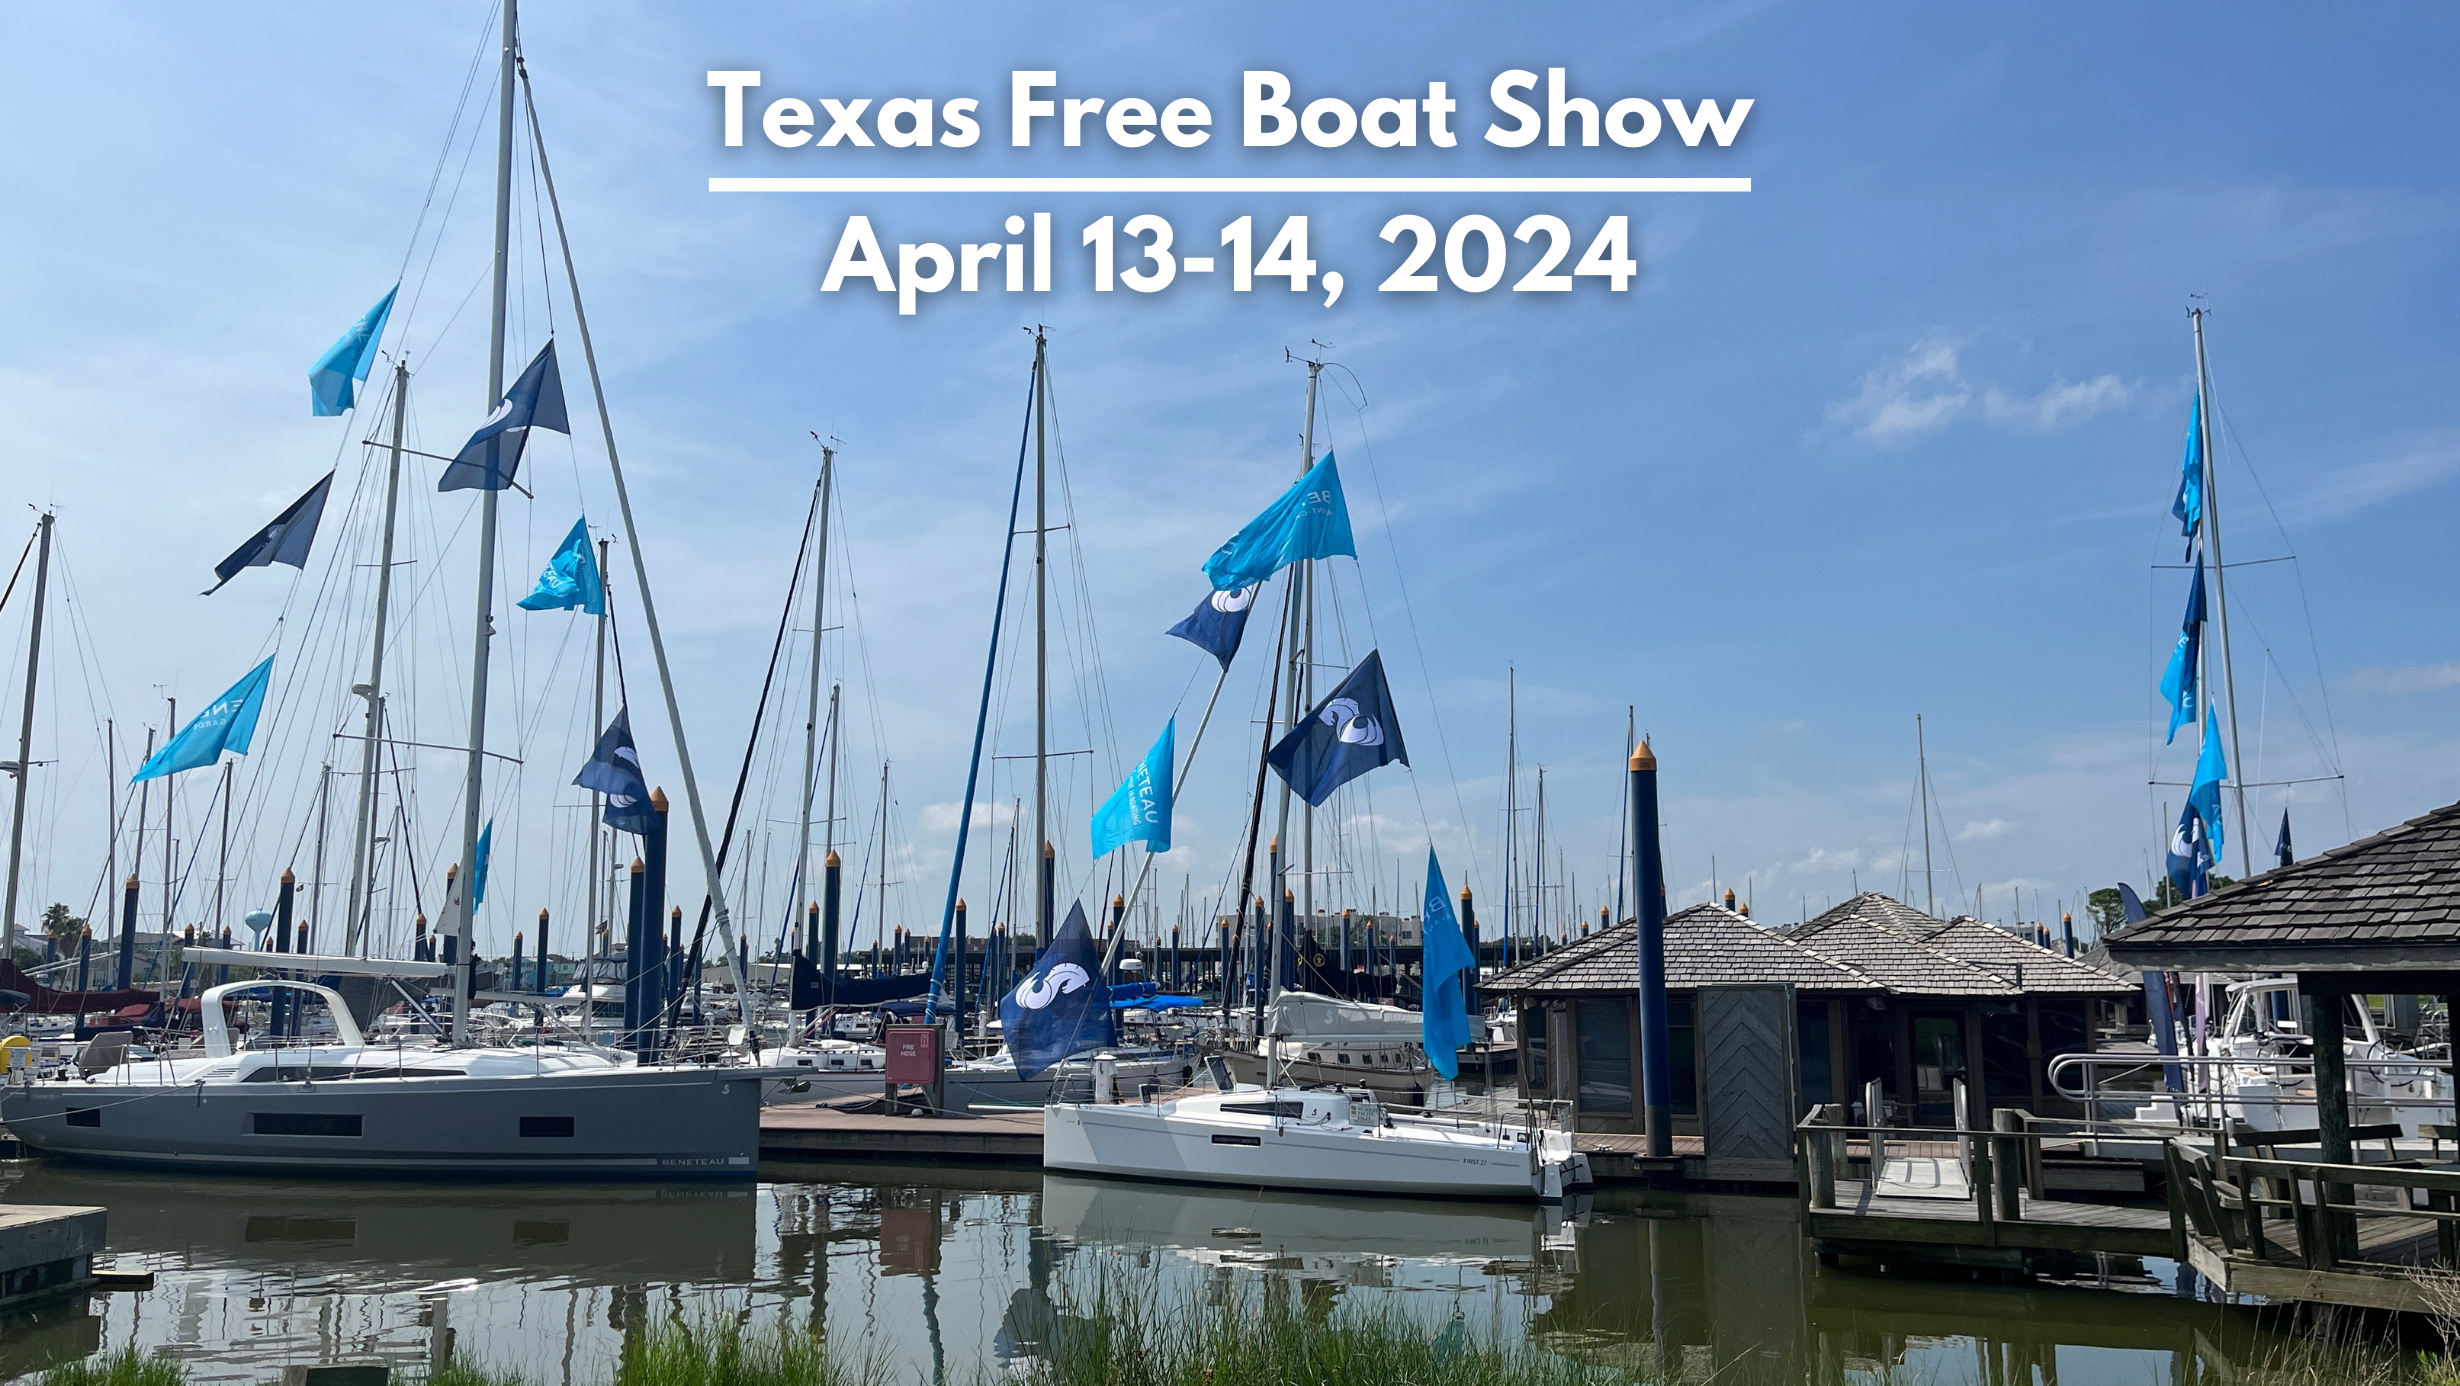 Little Yacht Sales, Texas Sailboat Show, Houston Boat Show, Free